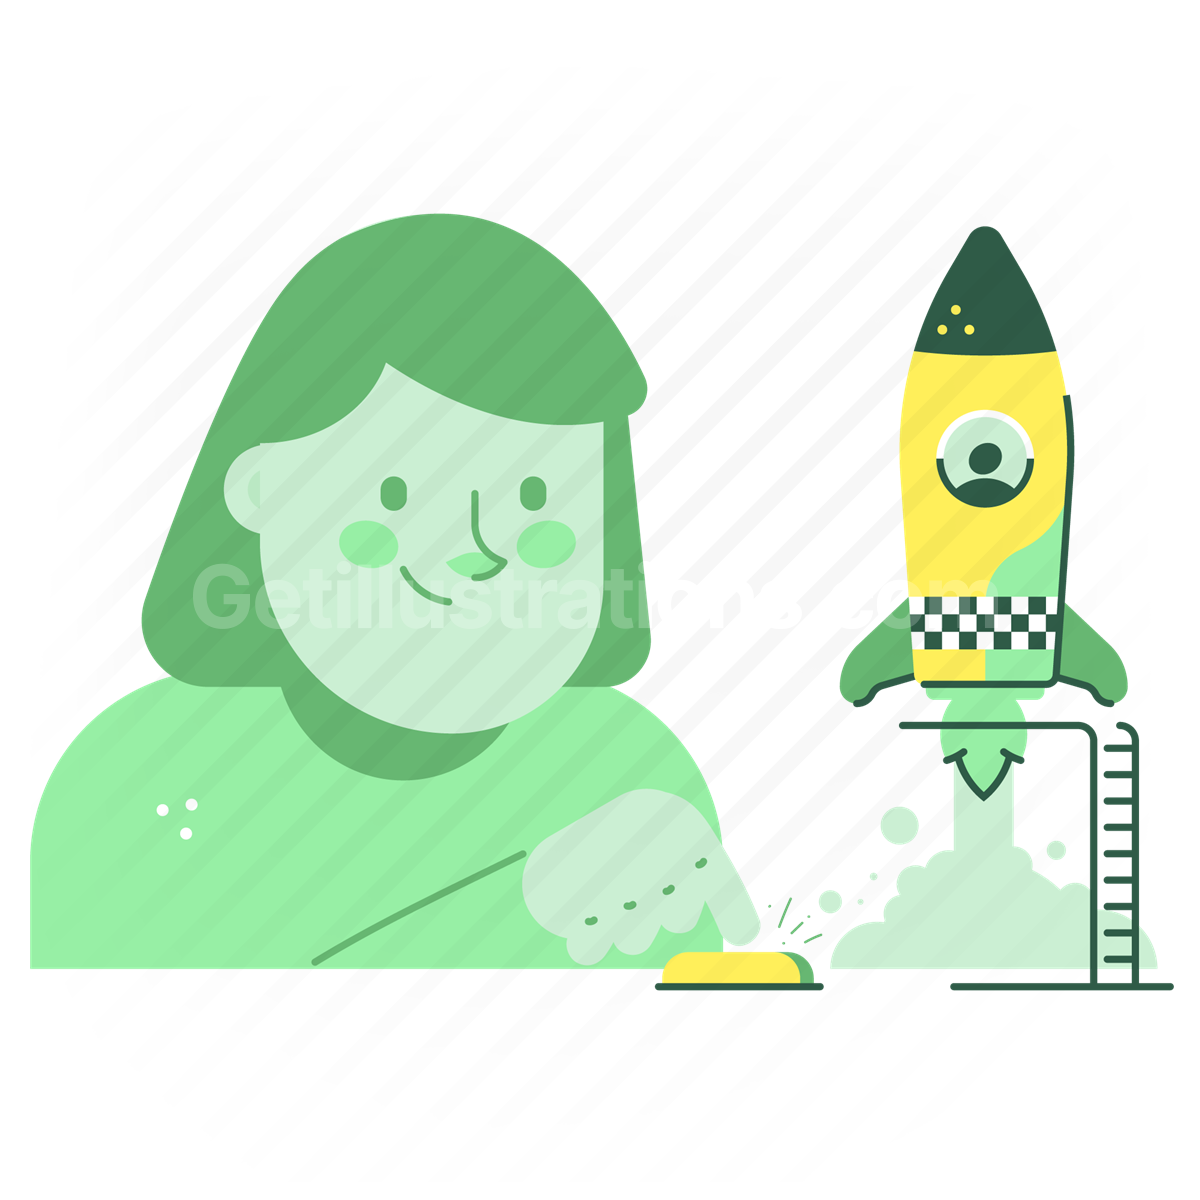 woman, female, person, rocket, launch, start up, project, complete